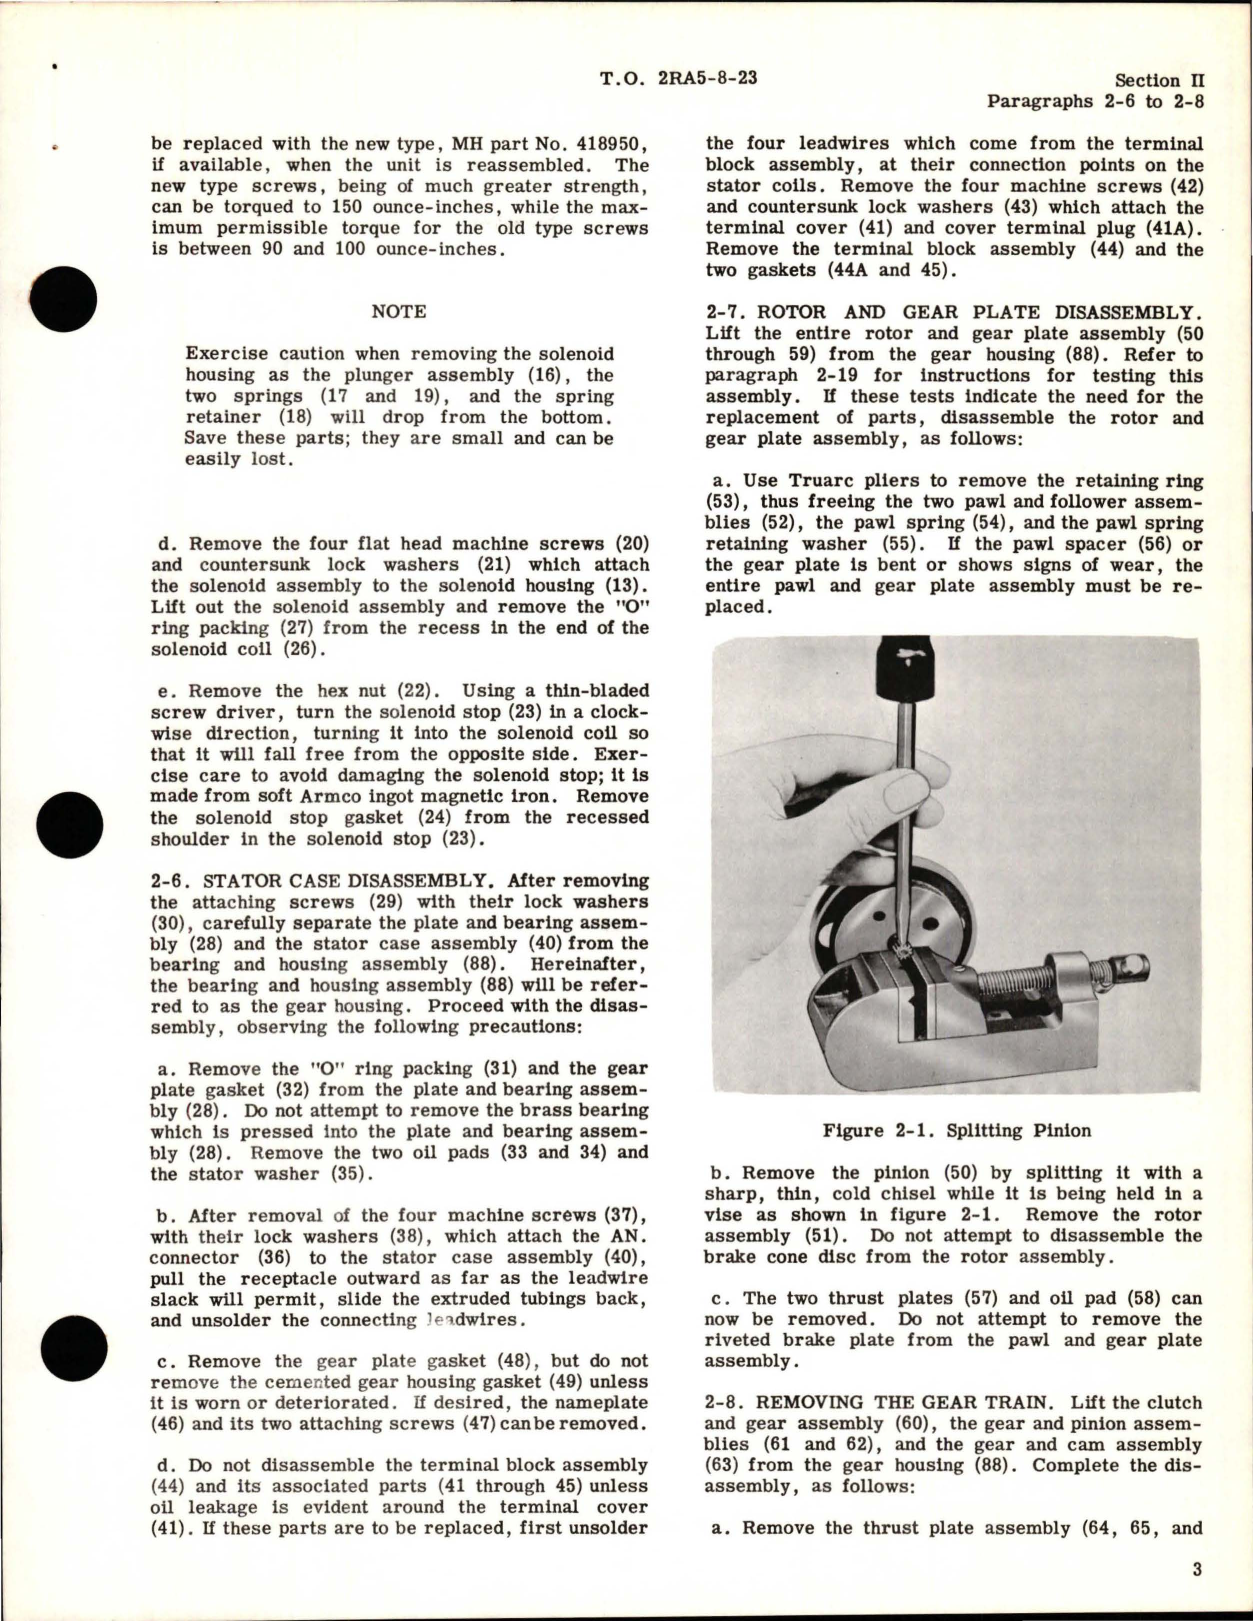 Sample page 7 from AirCorps Library document: Overhaul Instructions for Waste Gate Motors - MG7012A-1 and MG7012C-1